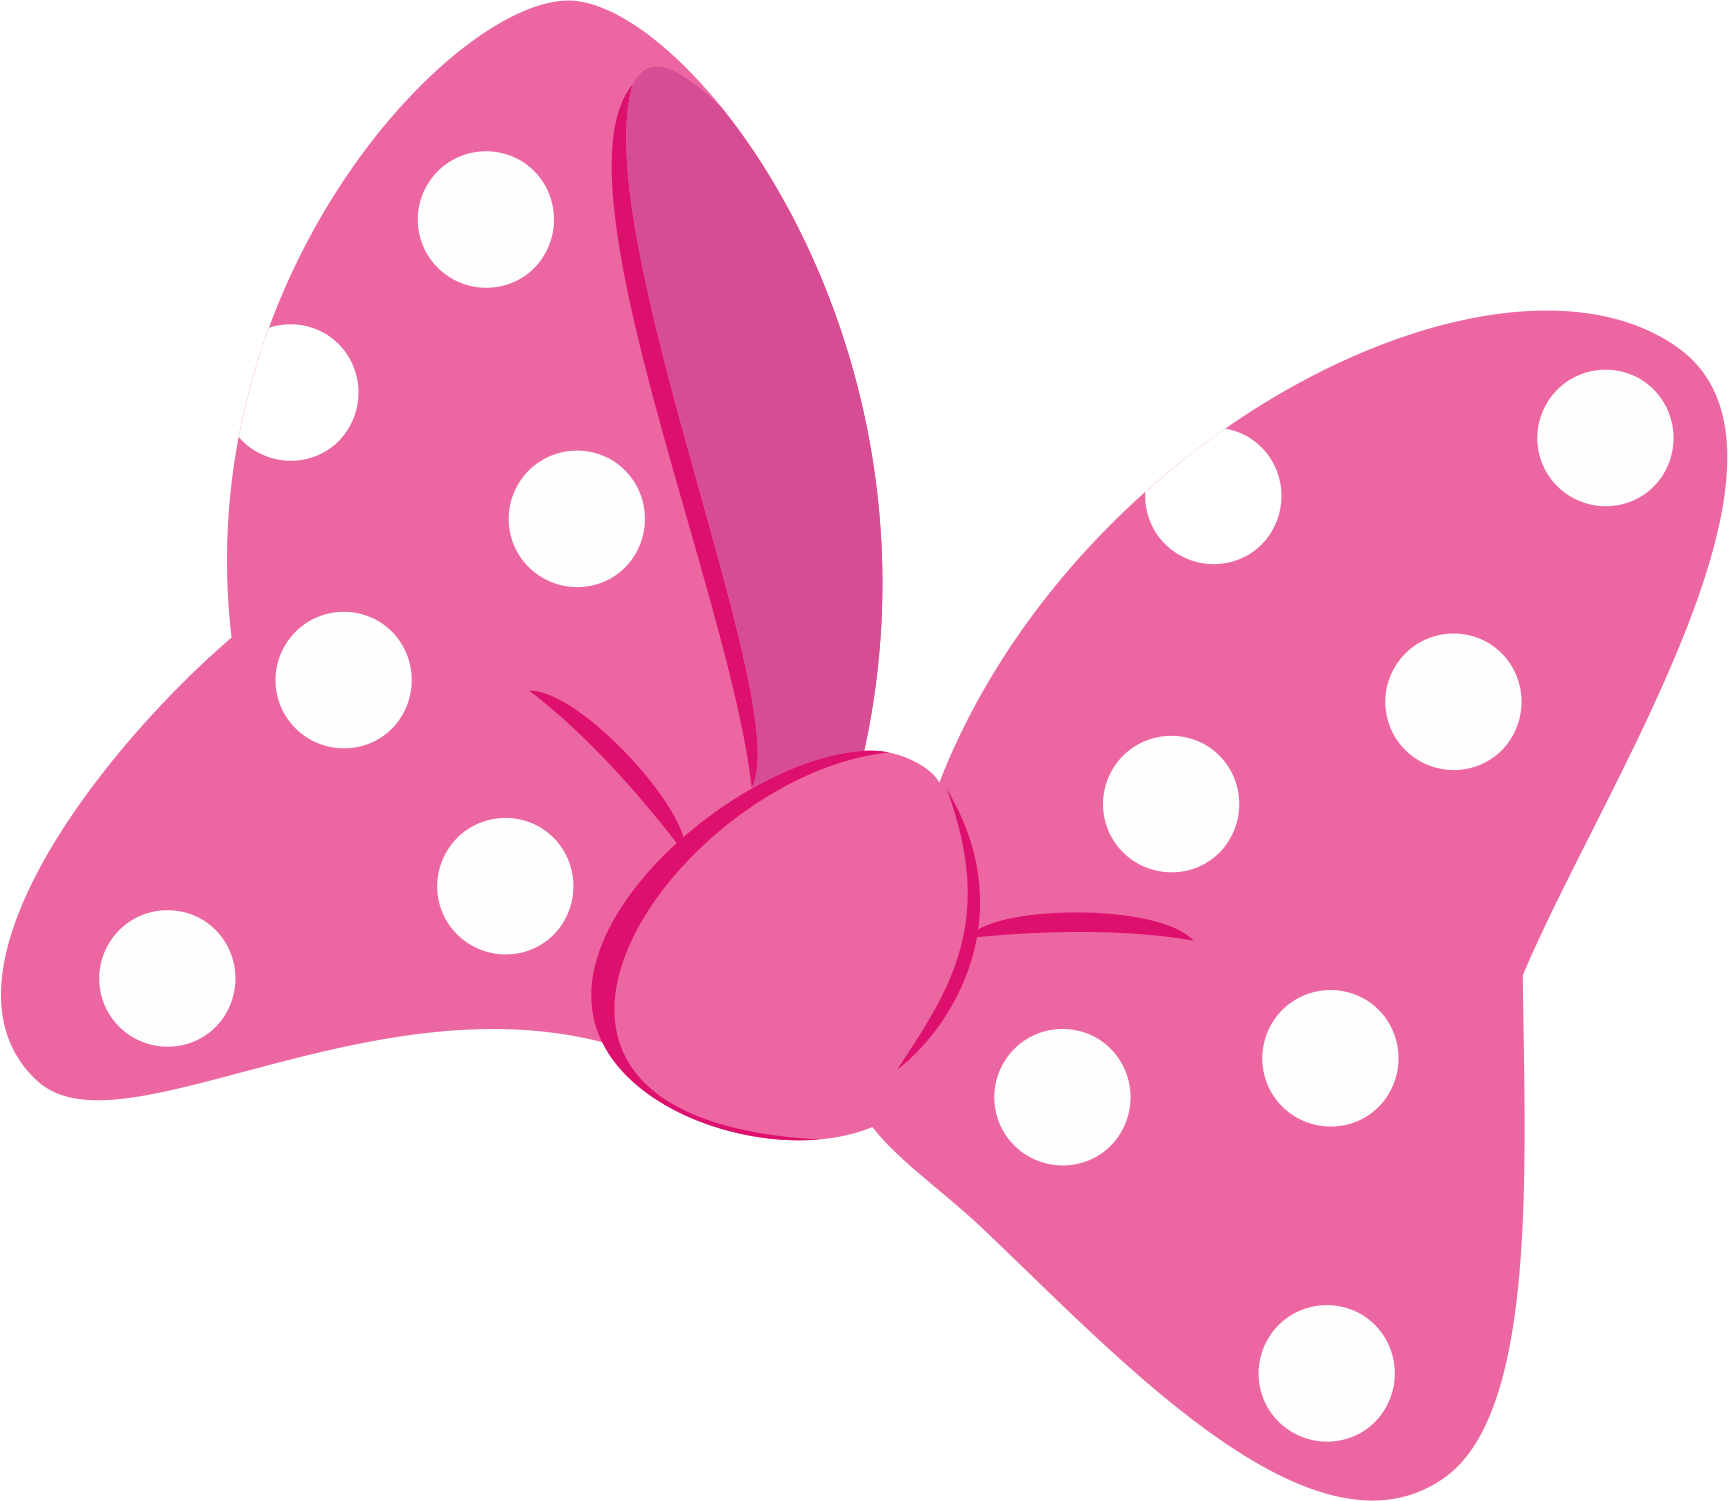 A Pink Bow With White Dots